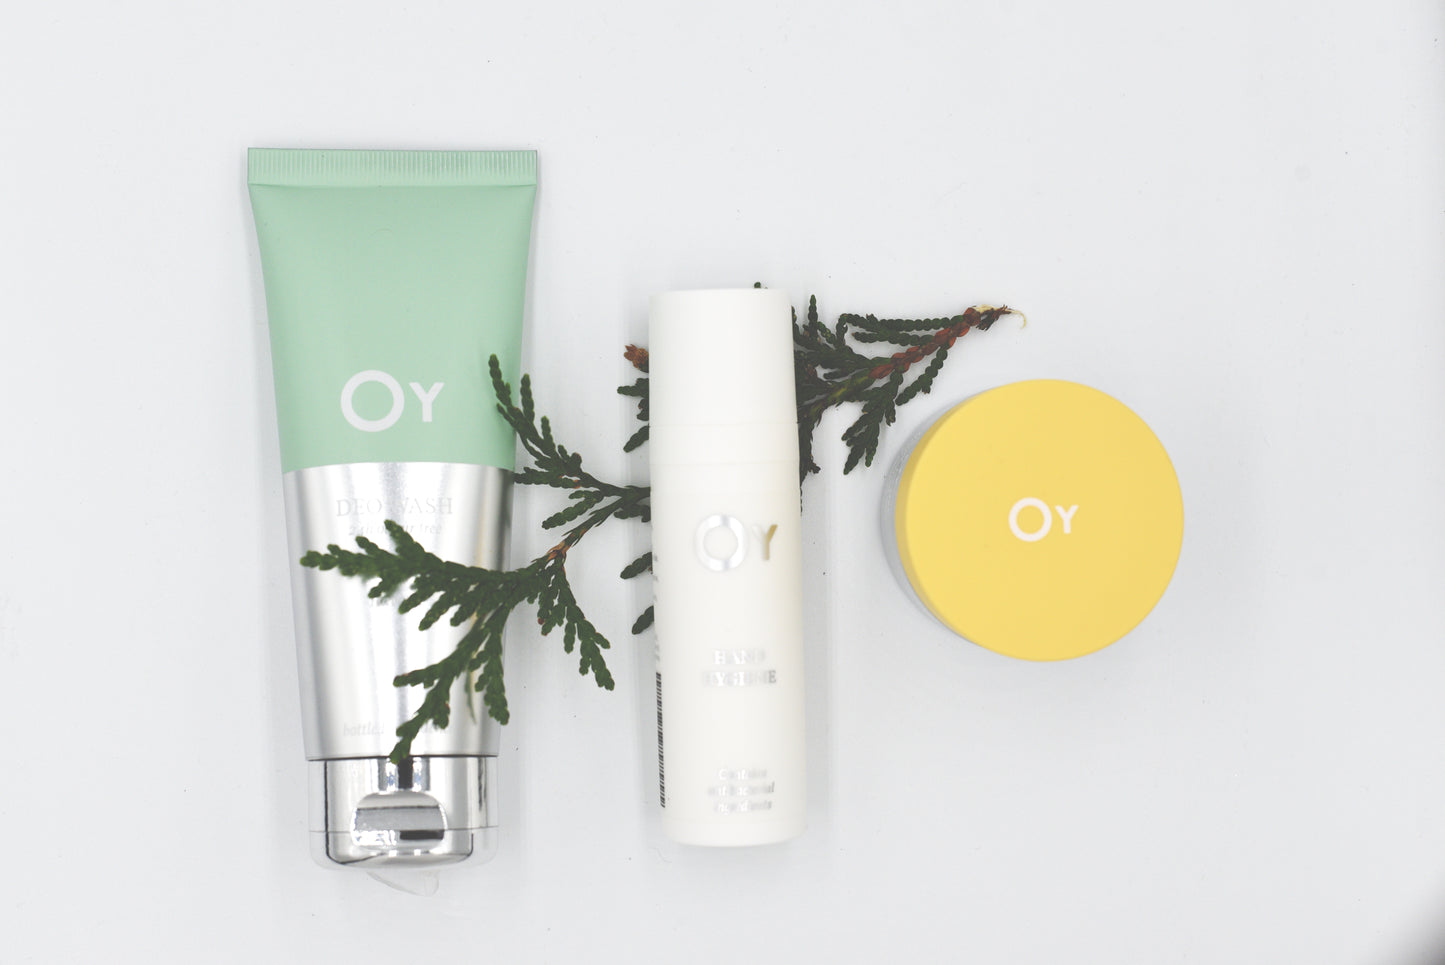 Oy gift package "Acne Prone Skin"